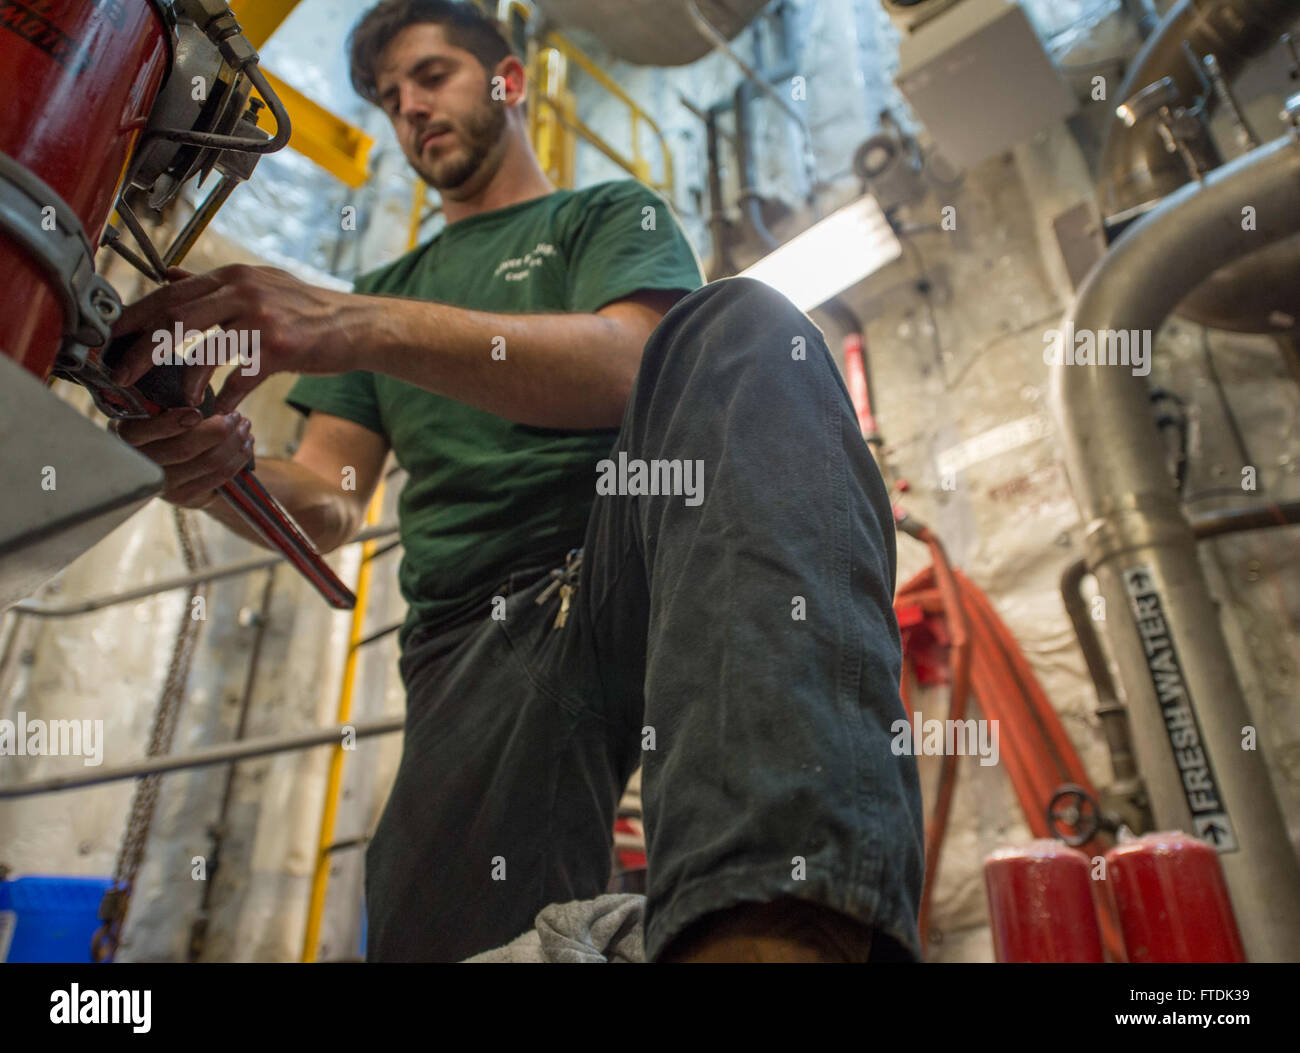 160104-N-WV703-020 ATLANTIC OCEAN (Jan. 4, 2016) 1st Assistant Engineer David Desousa, a civil service mariner, changes the final fuel filter aboard USNS Spearhead (T-EPF 1) Jan. 4, 2015. The Military Sealift Command expeditionary fast transport vessel USNS Spearhead is on a scheduled deployment to the U.S. 6th Fleet area of operations to support the international collaborative capacity-building program Africa Partnership Station. (U.S. Navy photo by Mass Communication Specialist 3rd Class Amy M. Ressler/Released) Stock Photo